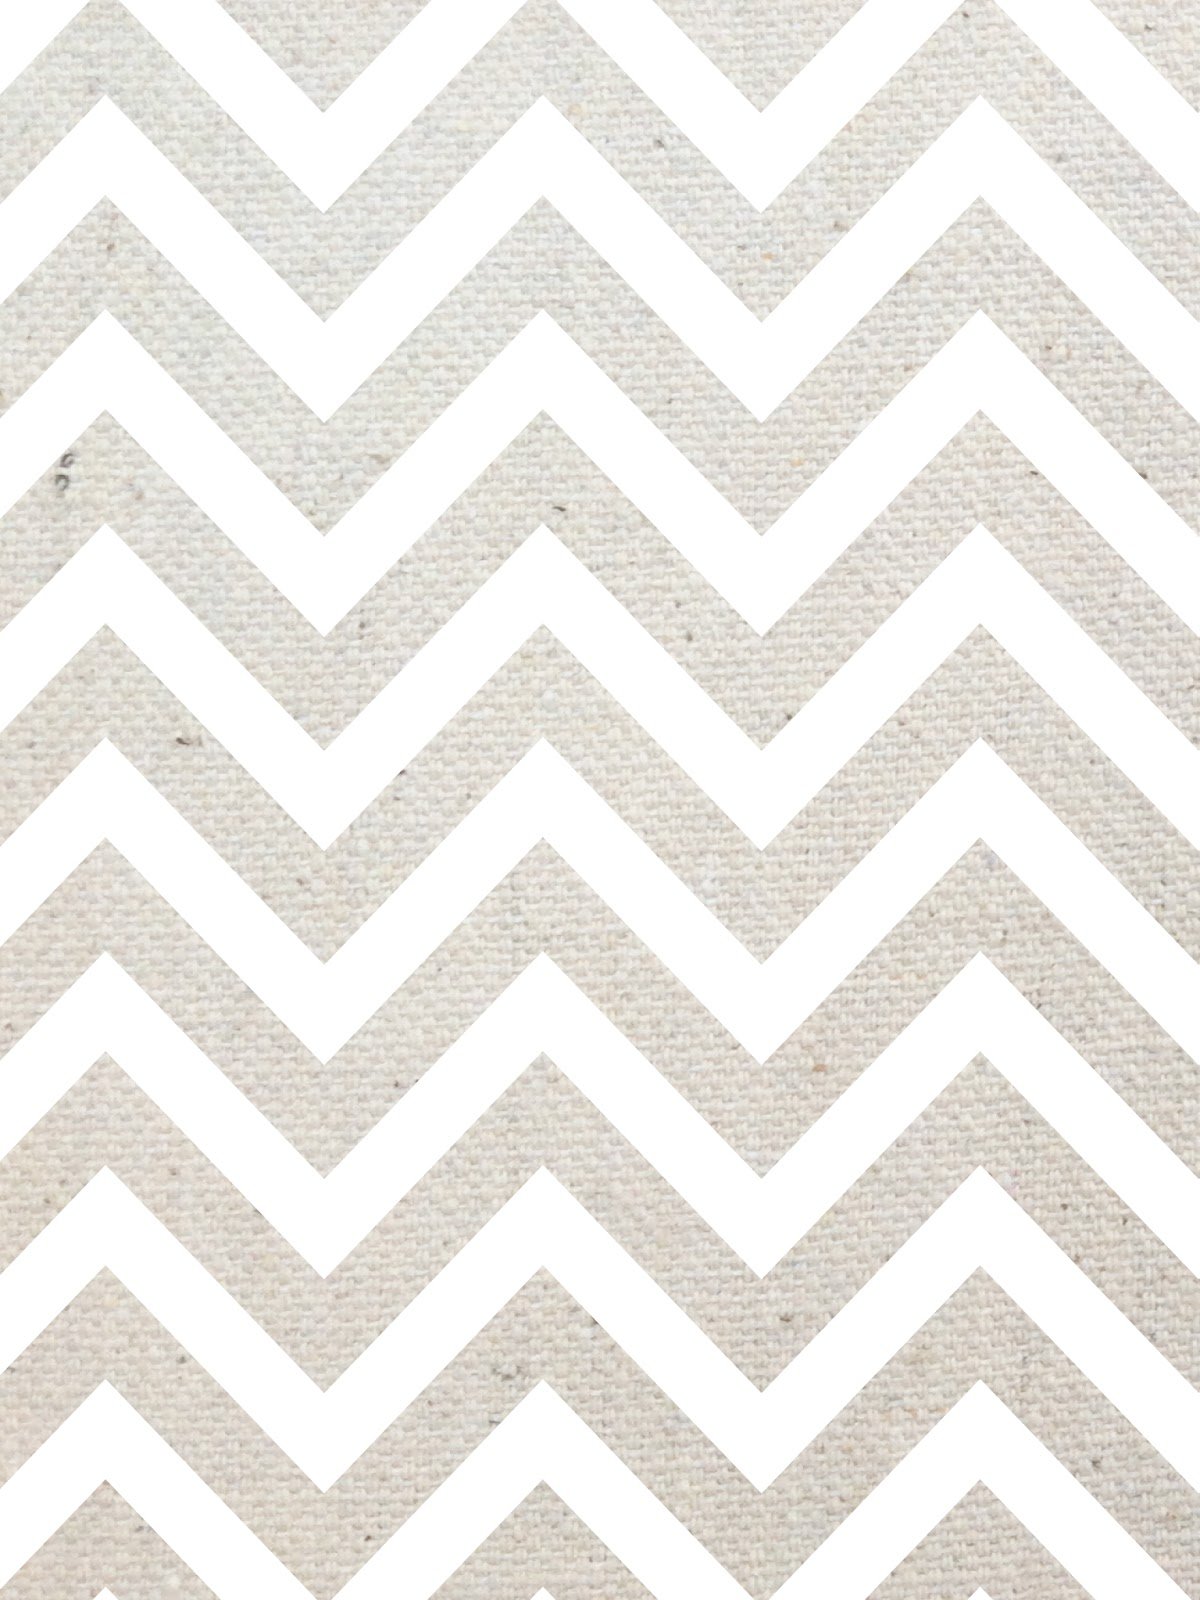 Pink And White Chevron Background for Pinterest